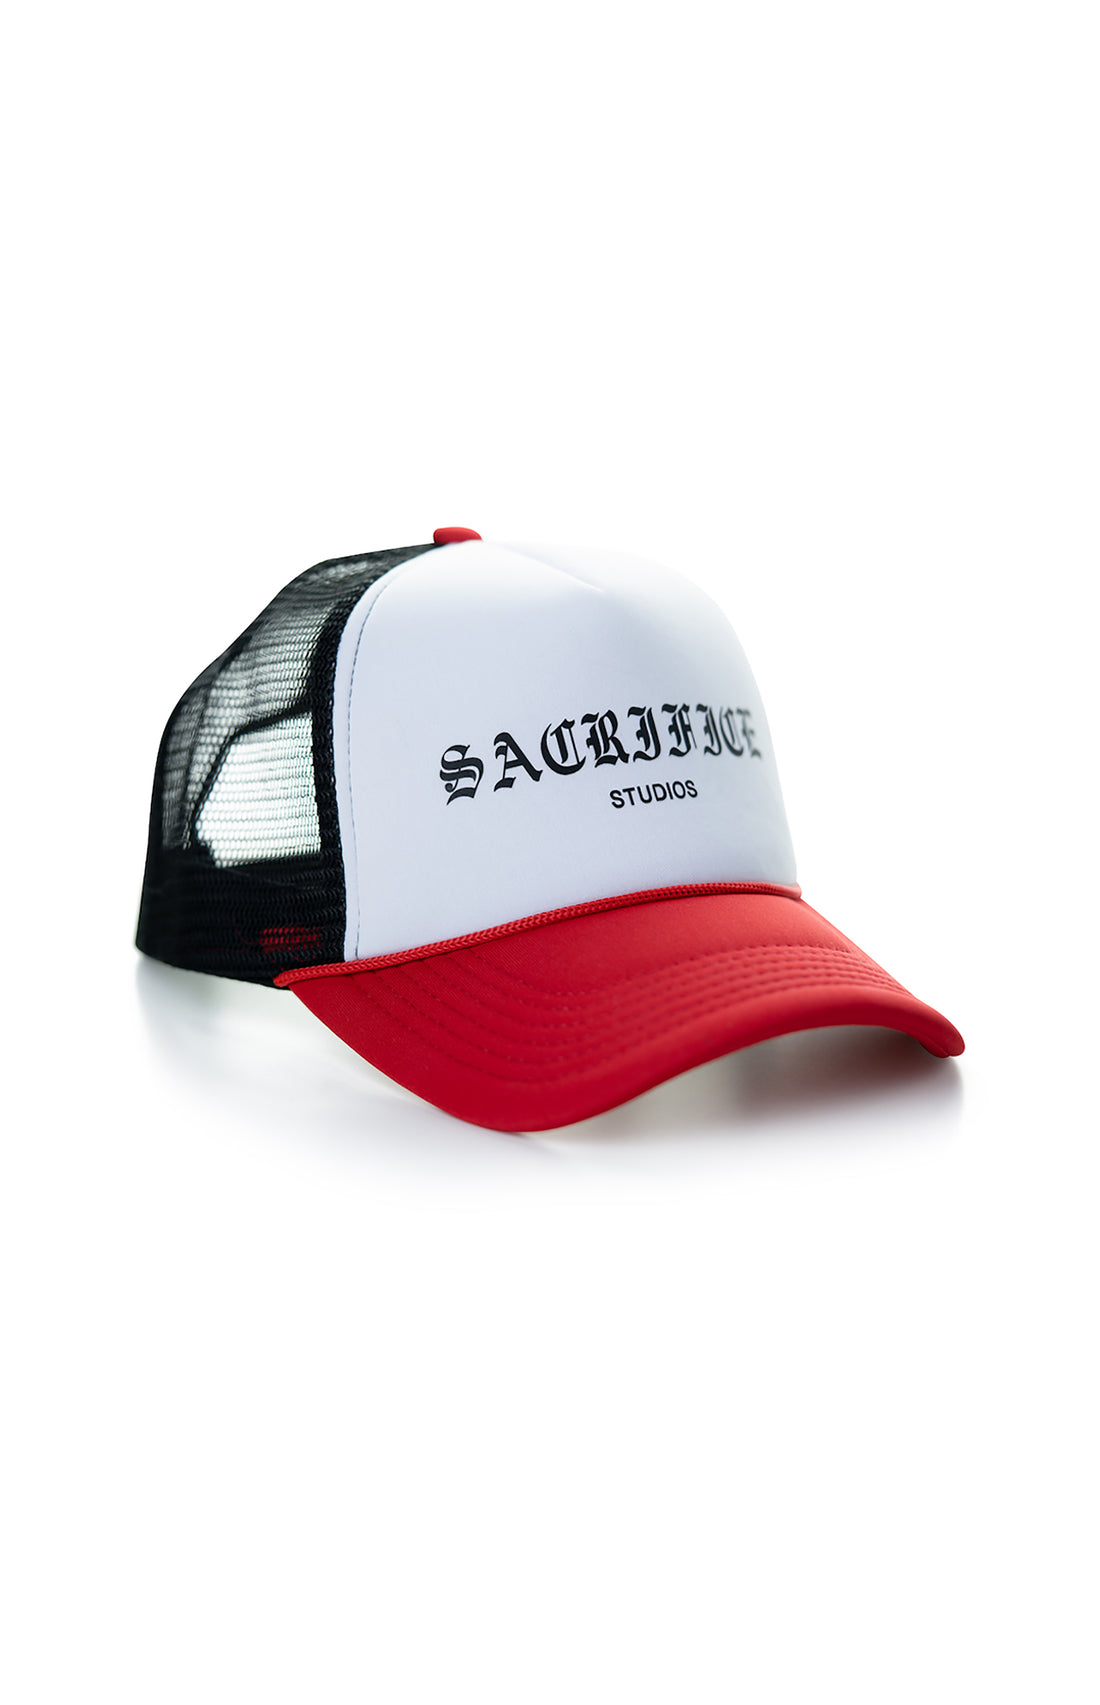 Premium Trucker Hat . Expertly crafted in Portugal. Located in Dubai. 